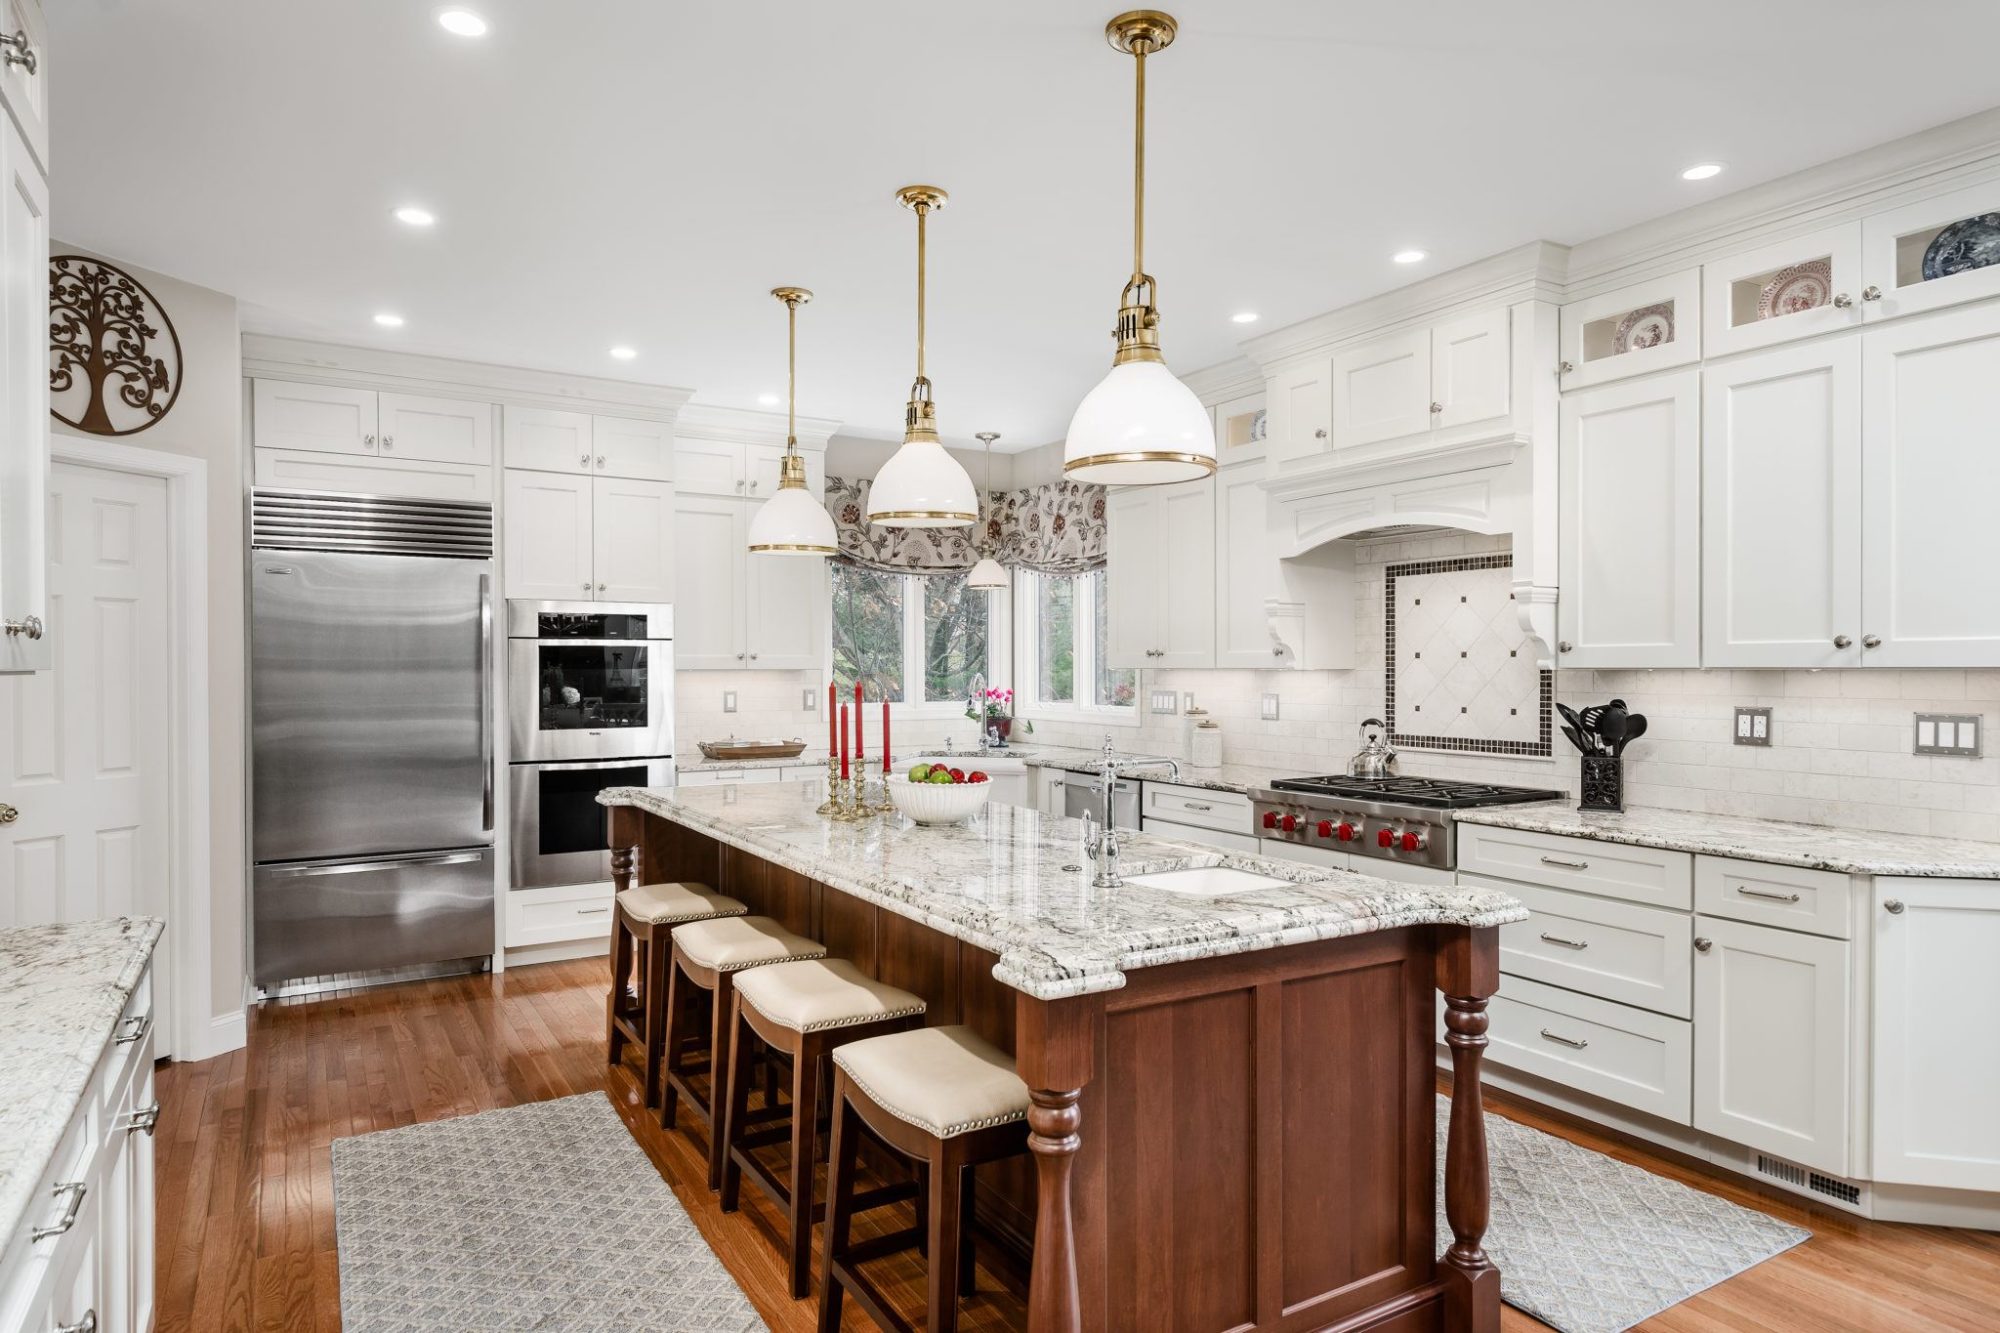 Why Are The Most Expensive Kitchens, Are Custom Cabinets More Expensive